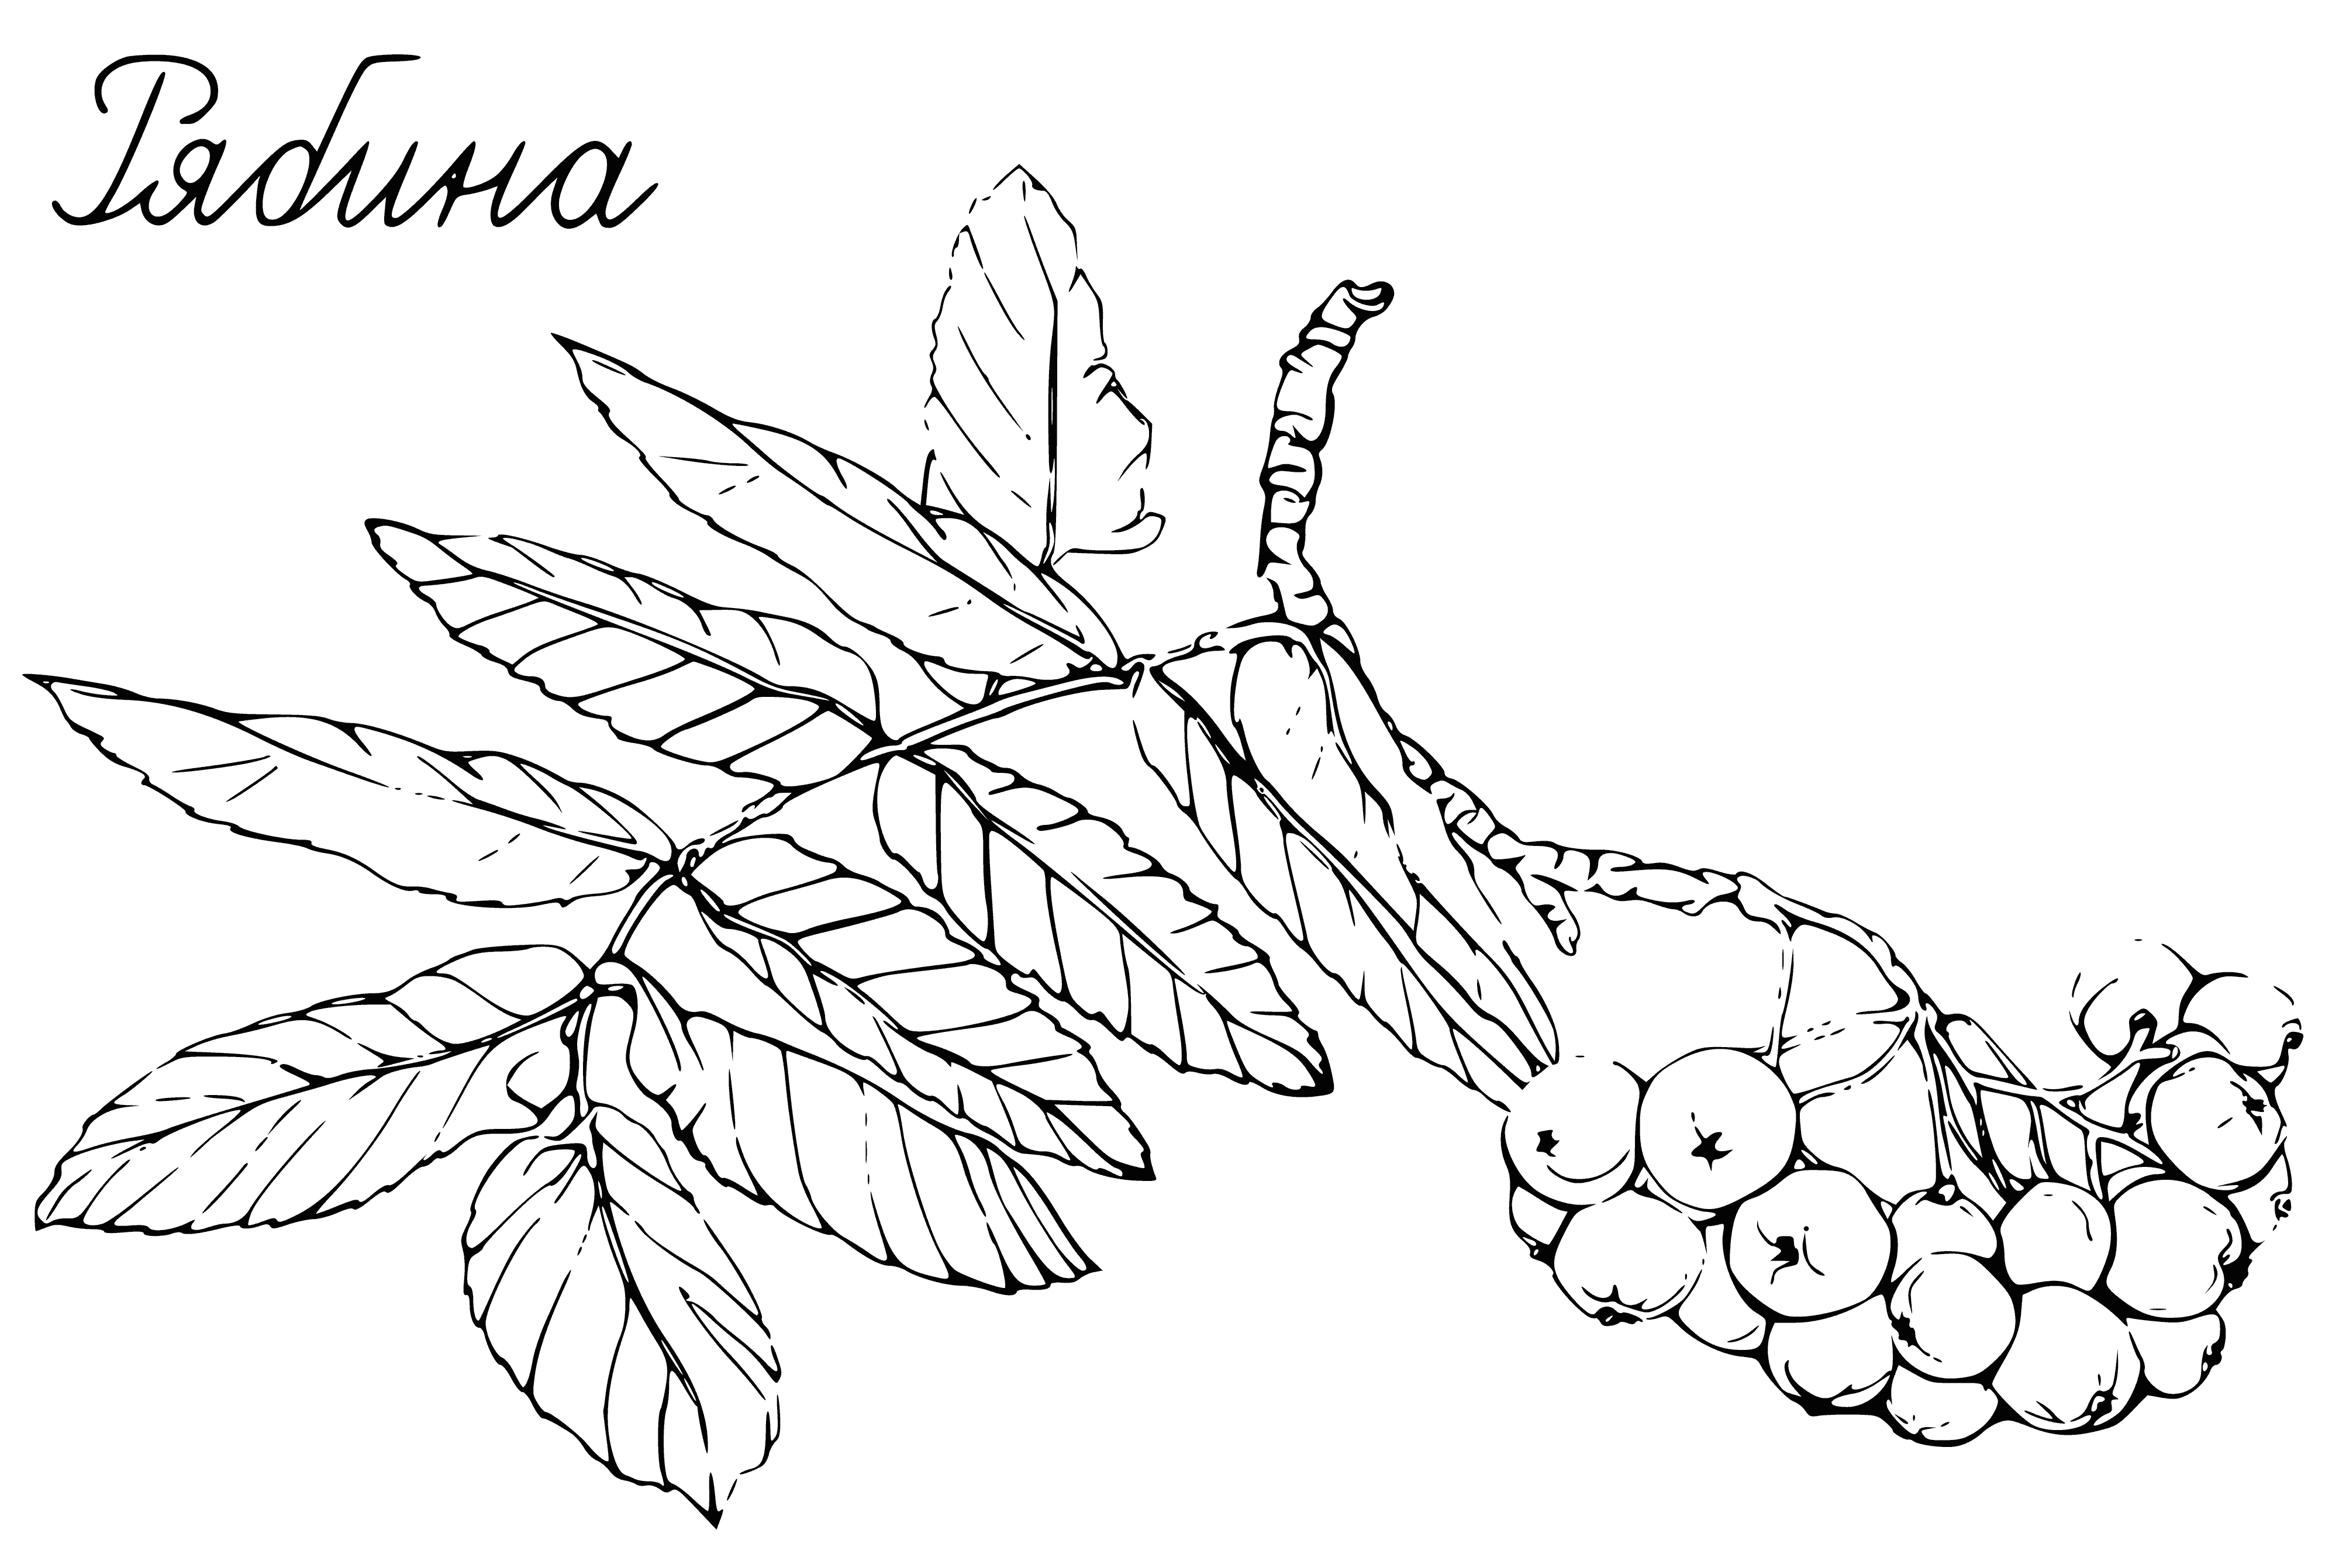 coloring page: Leaves alternate, elliptical, pointed tips, serrated edges, dark green; fruits red, spherical, grow in clusters, smooth surface.